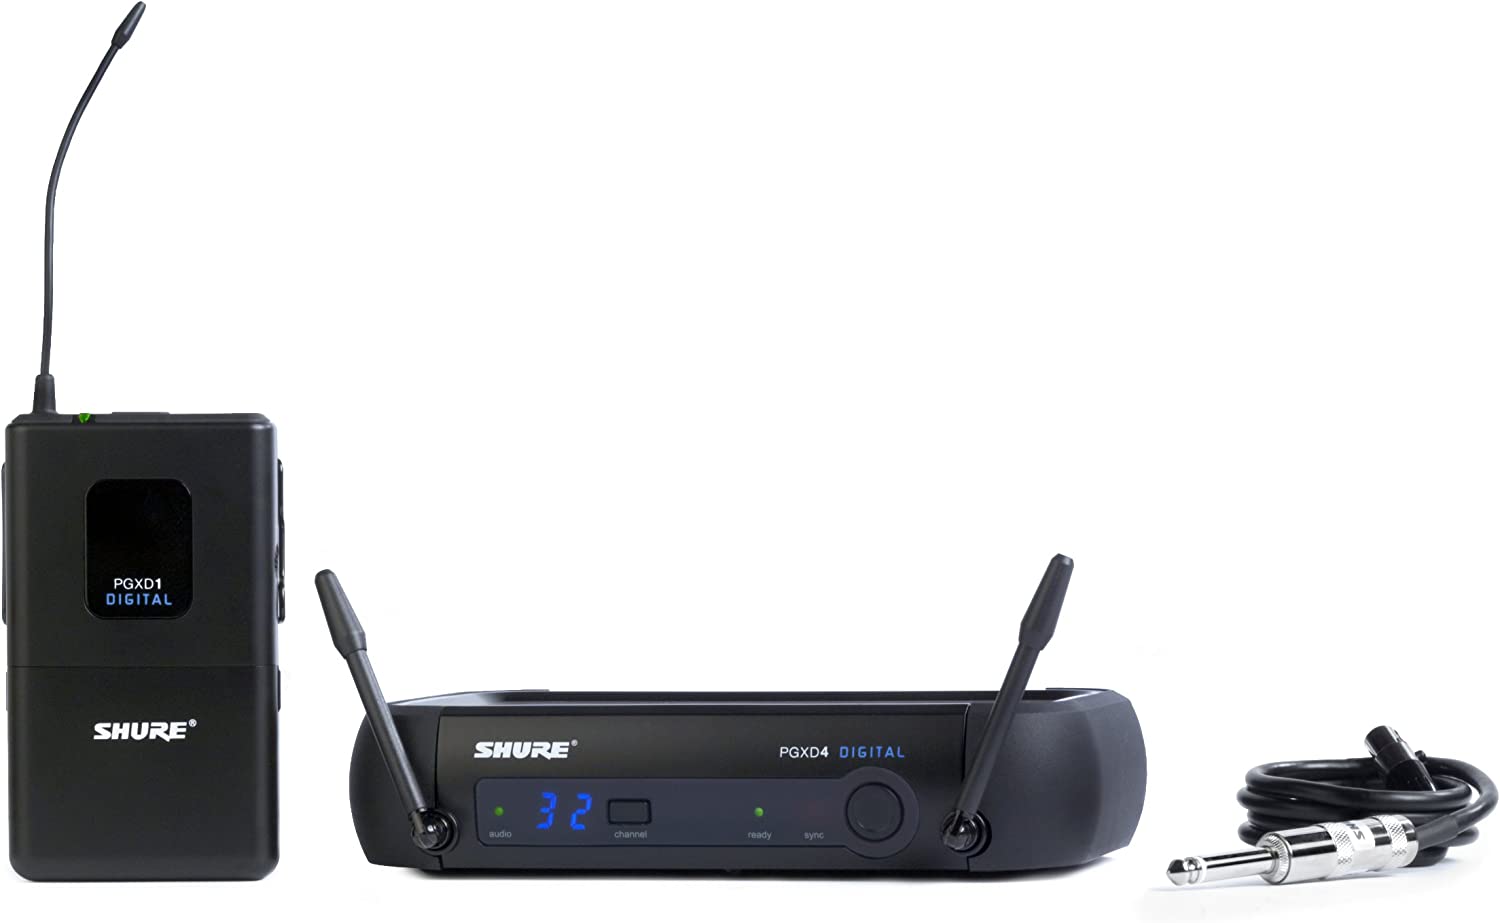 Shure PGXD14 Digital Wireless System on a white background